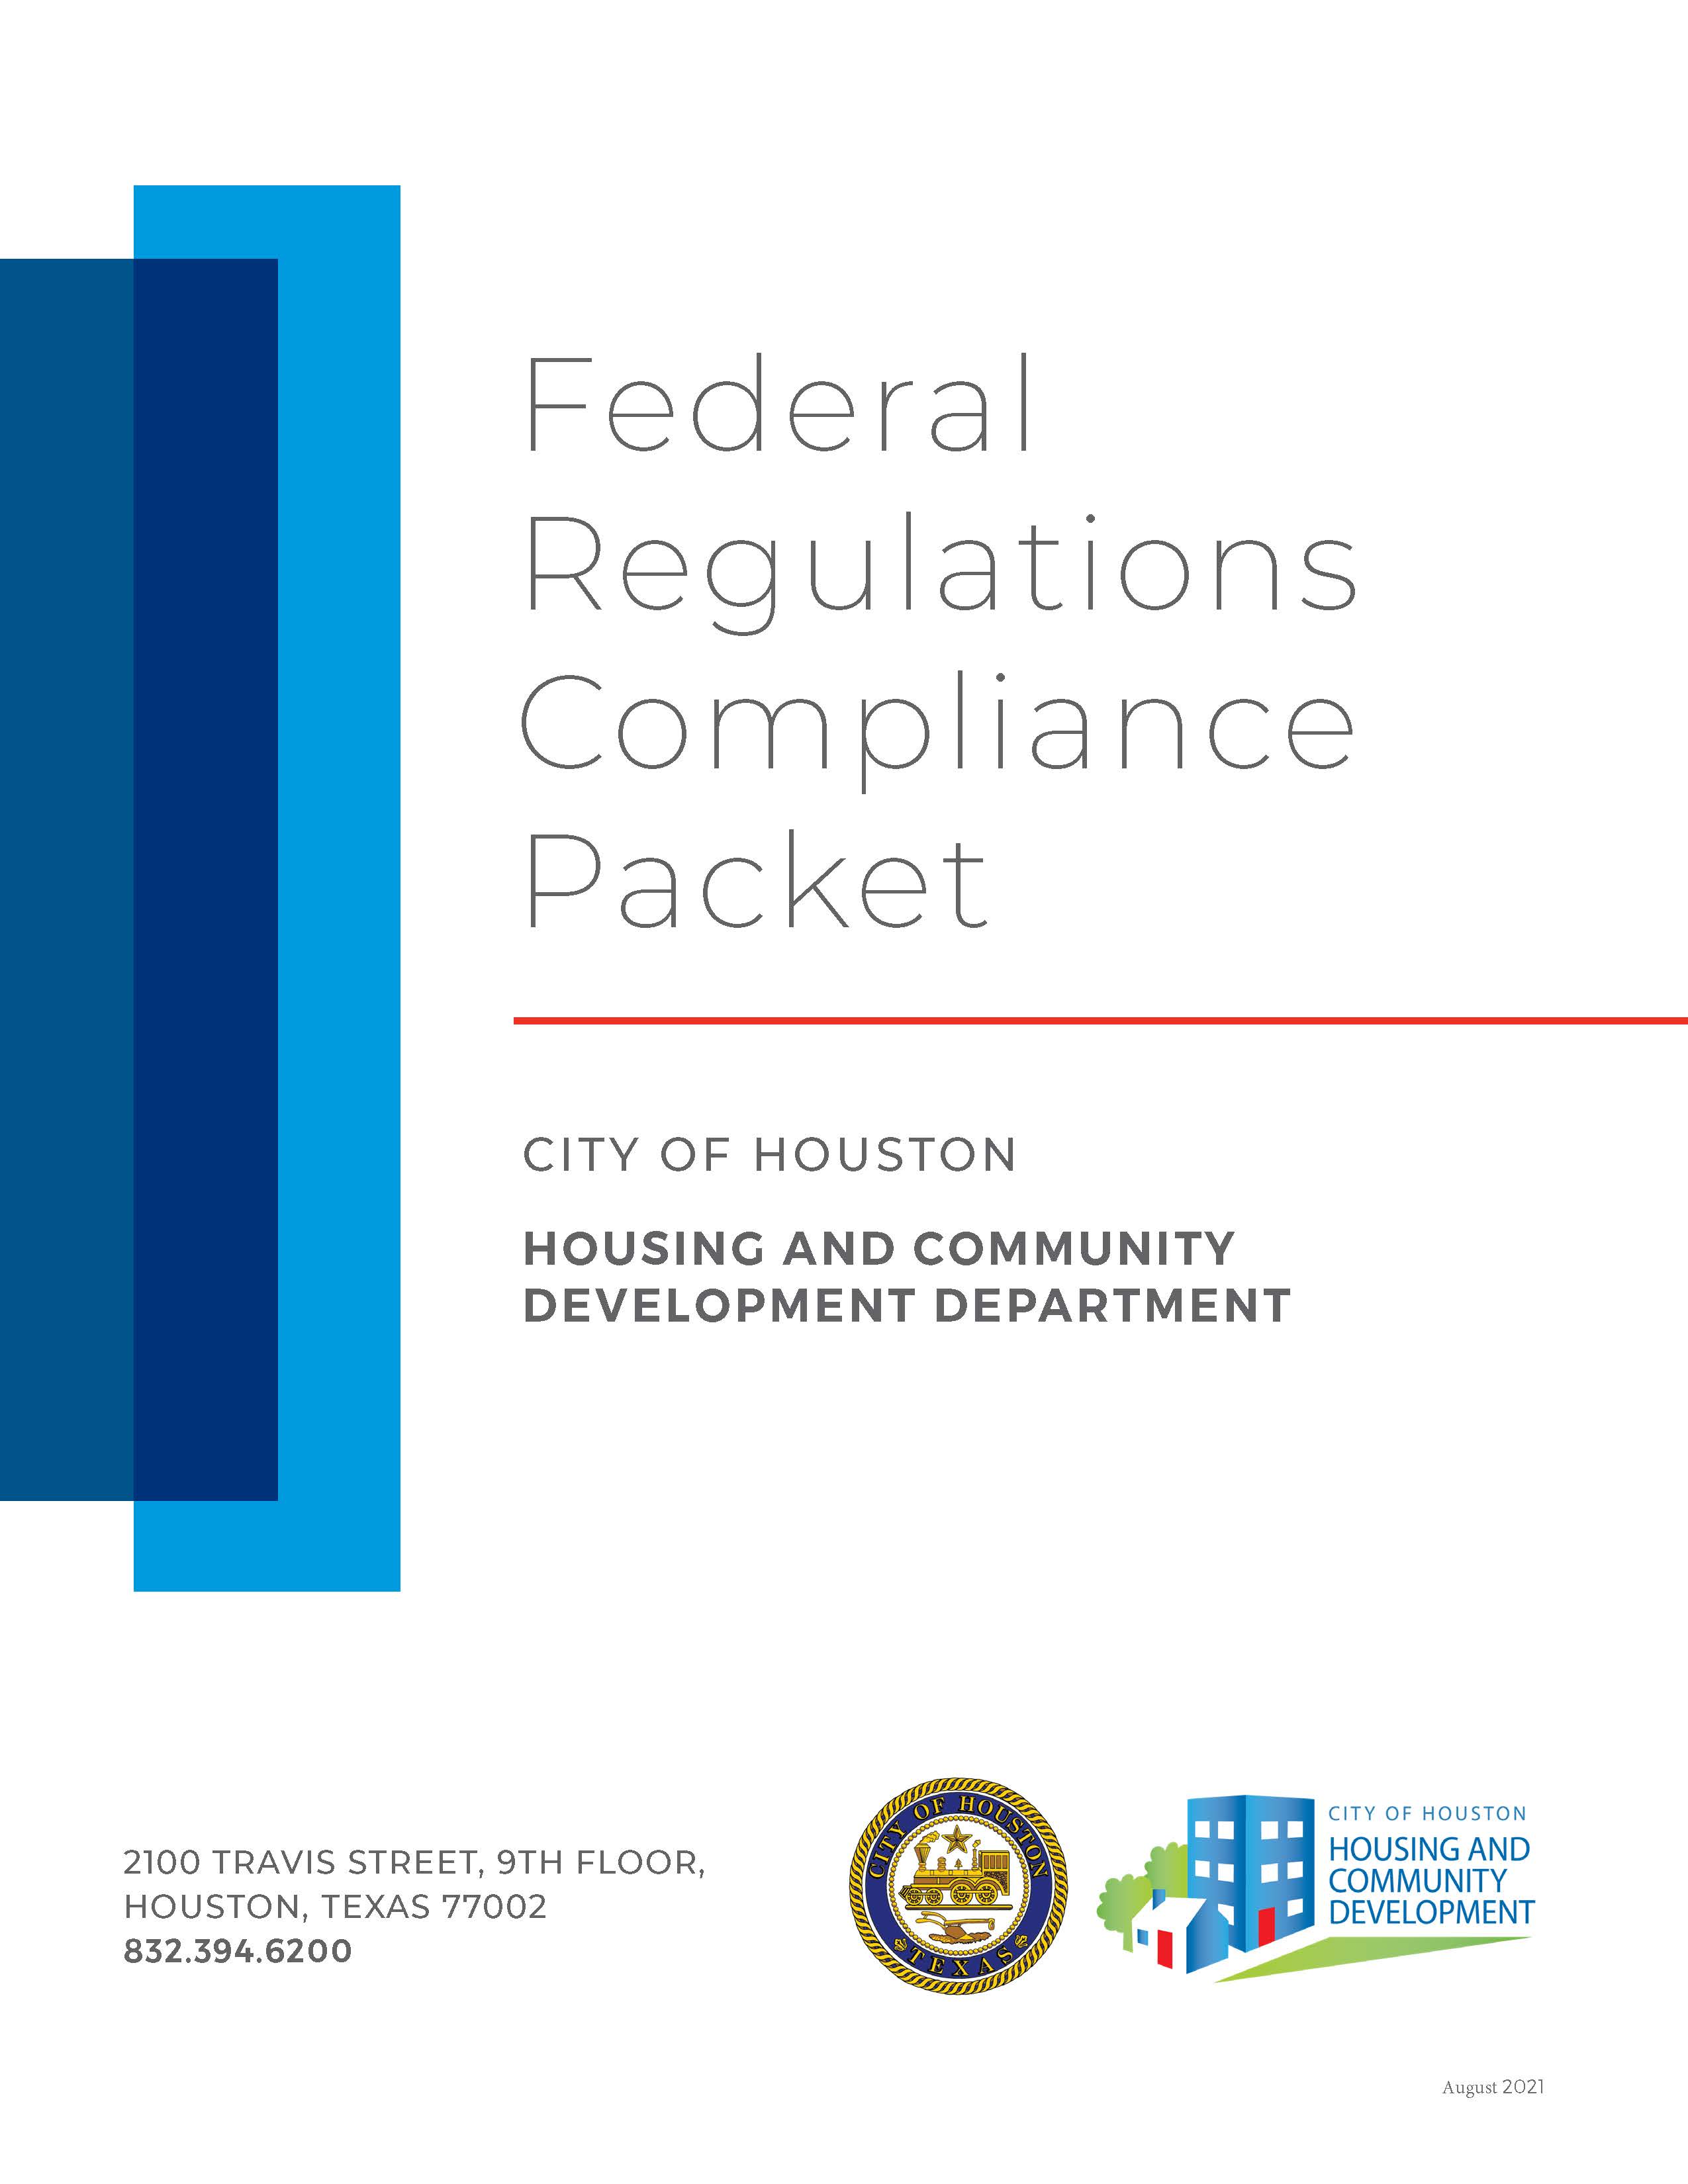 Federal Regulations Compliance Packet